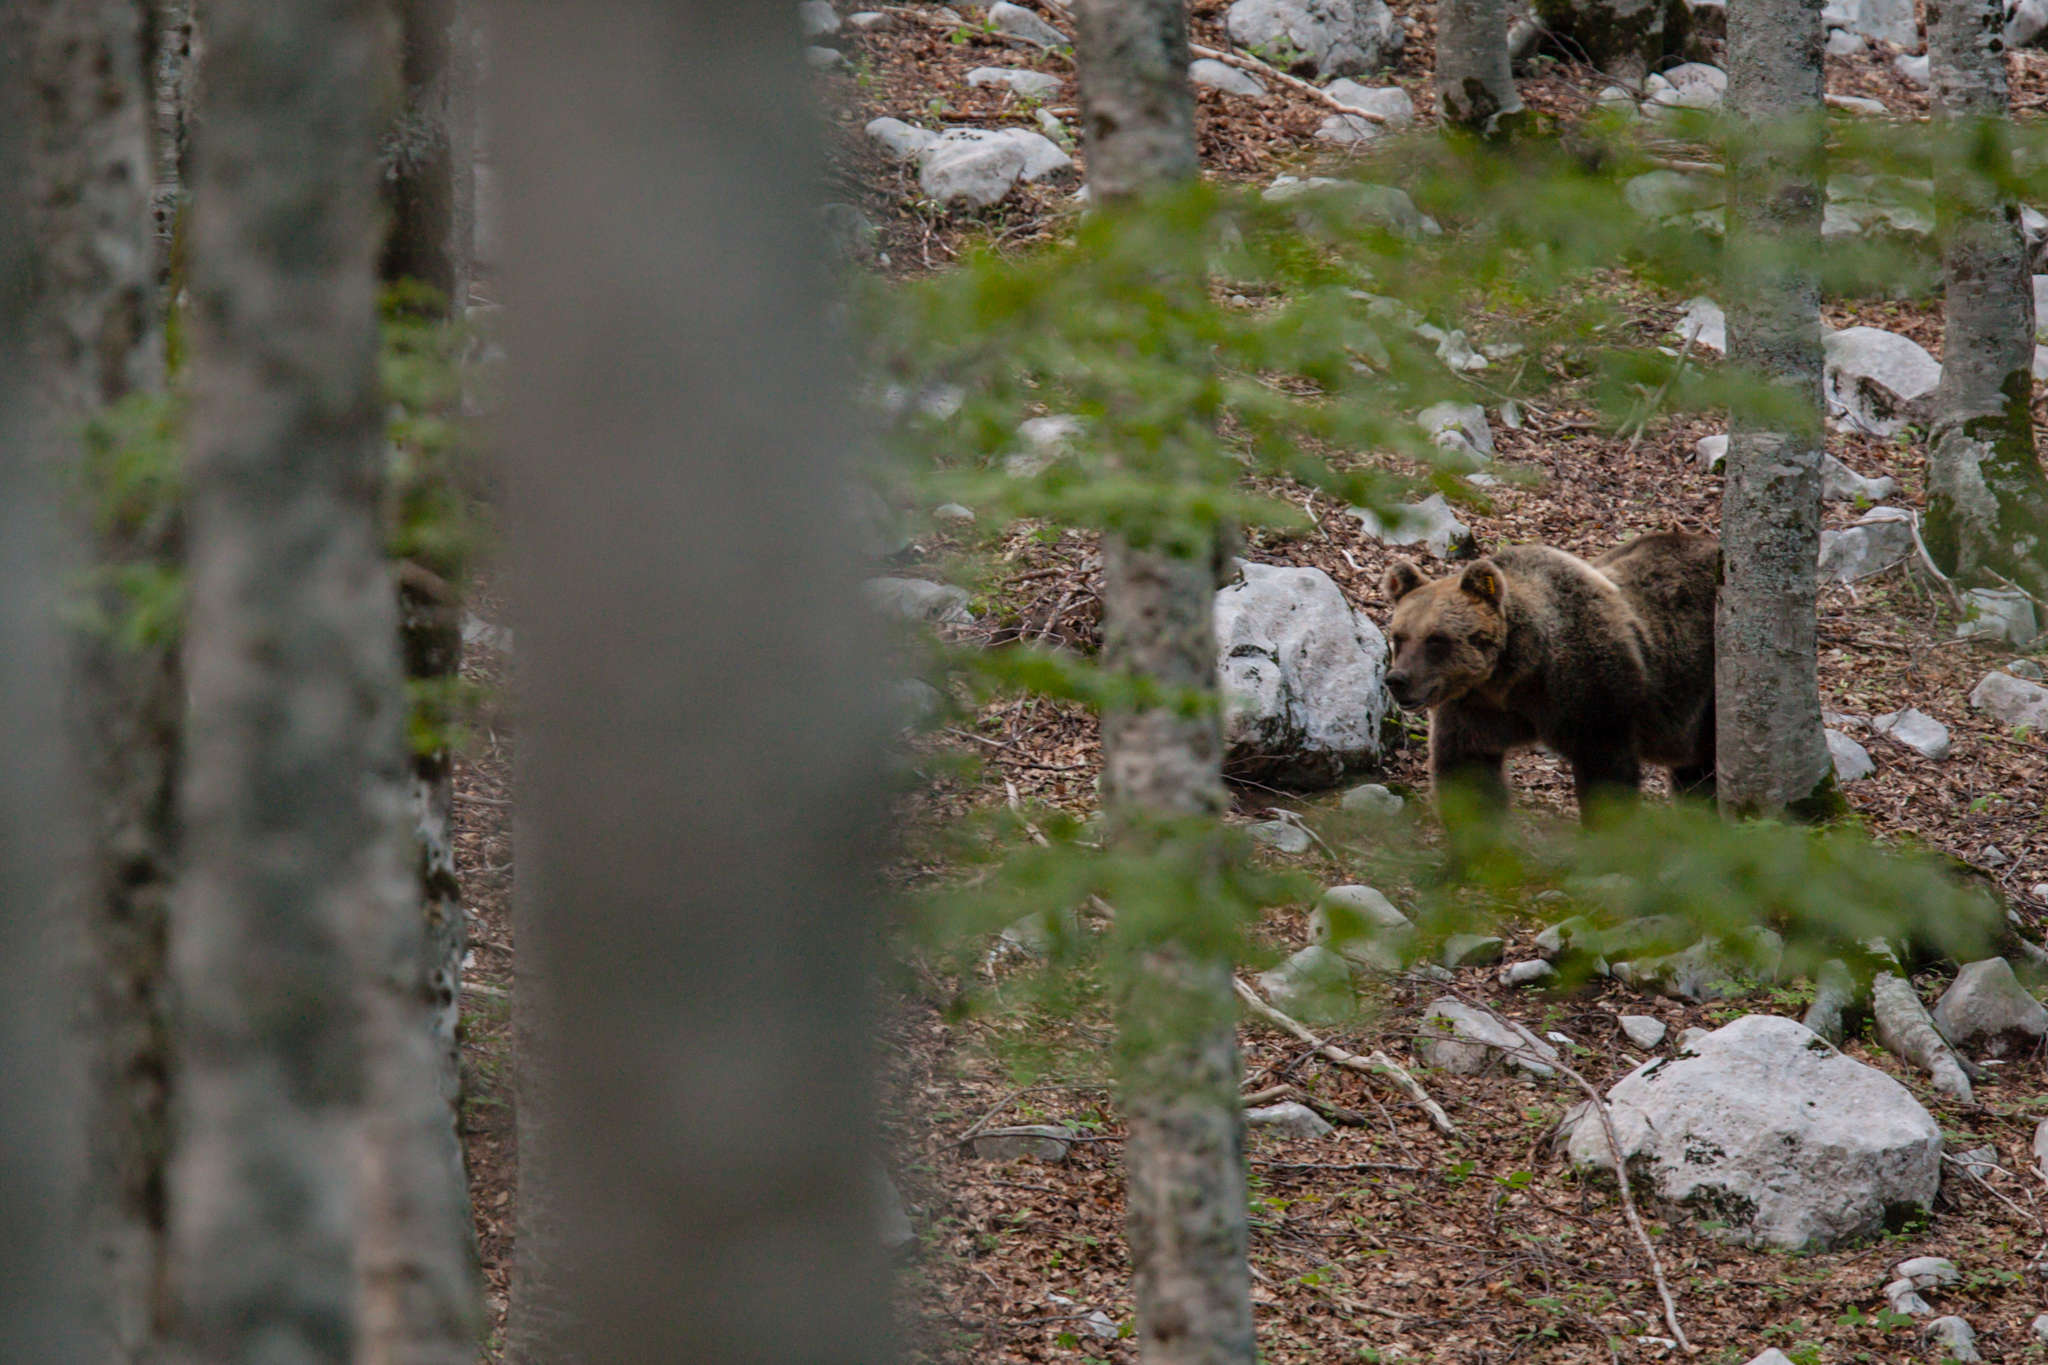 The Marsican brown bear population of the Central Apennines currently stands at around 60 (including newborn animals).